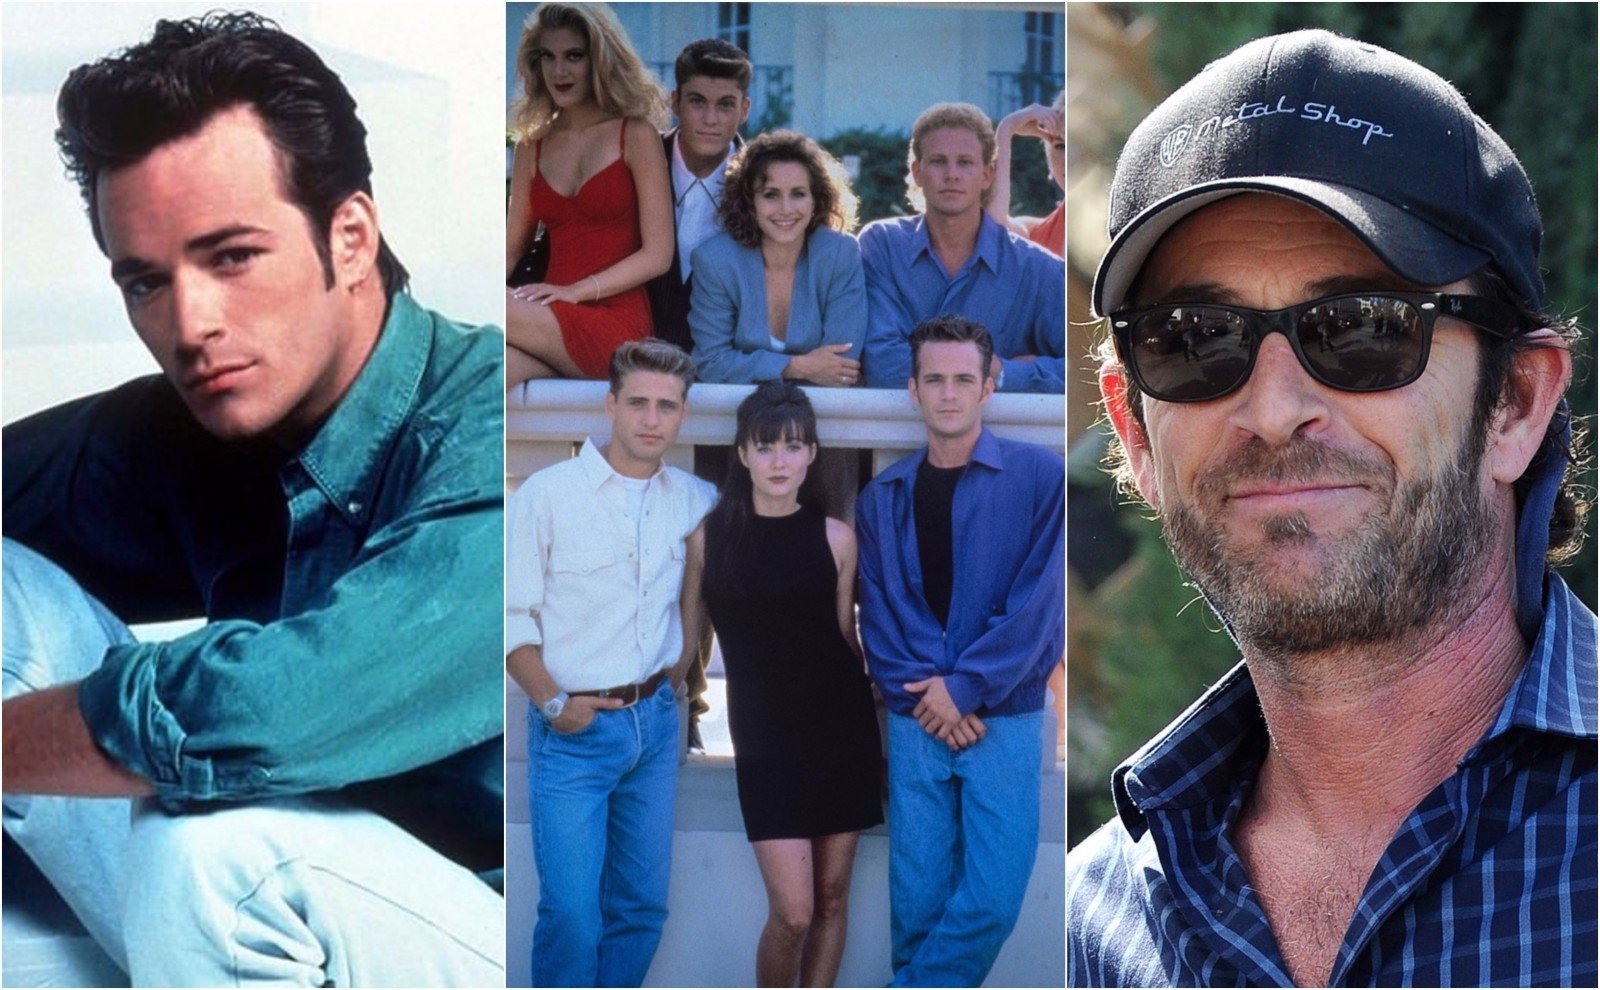 Luke Perry, actor of Beverly Hills, 90210, died in the hospital – Navva